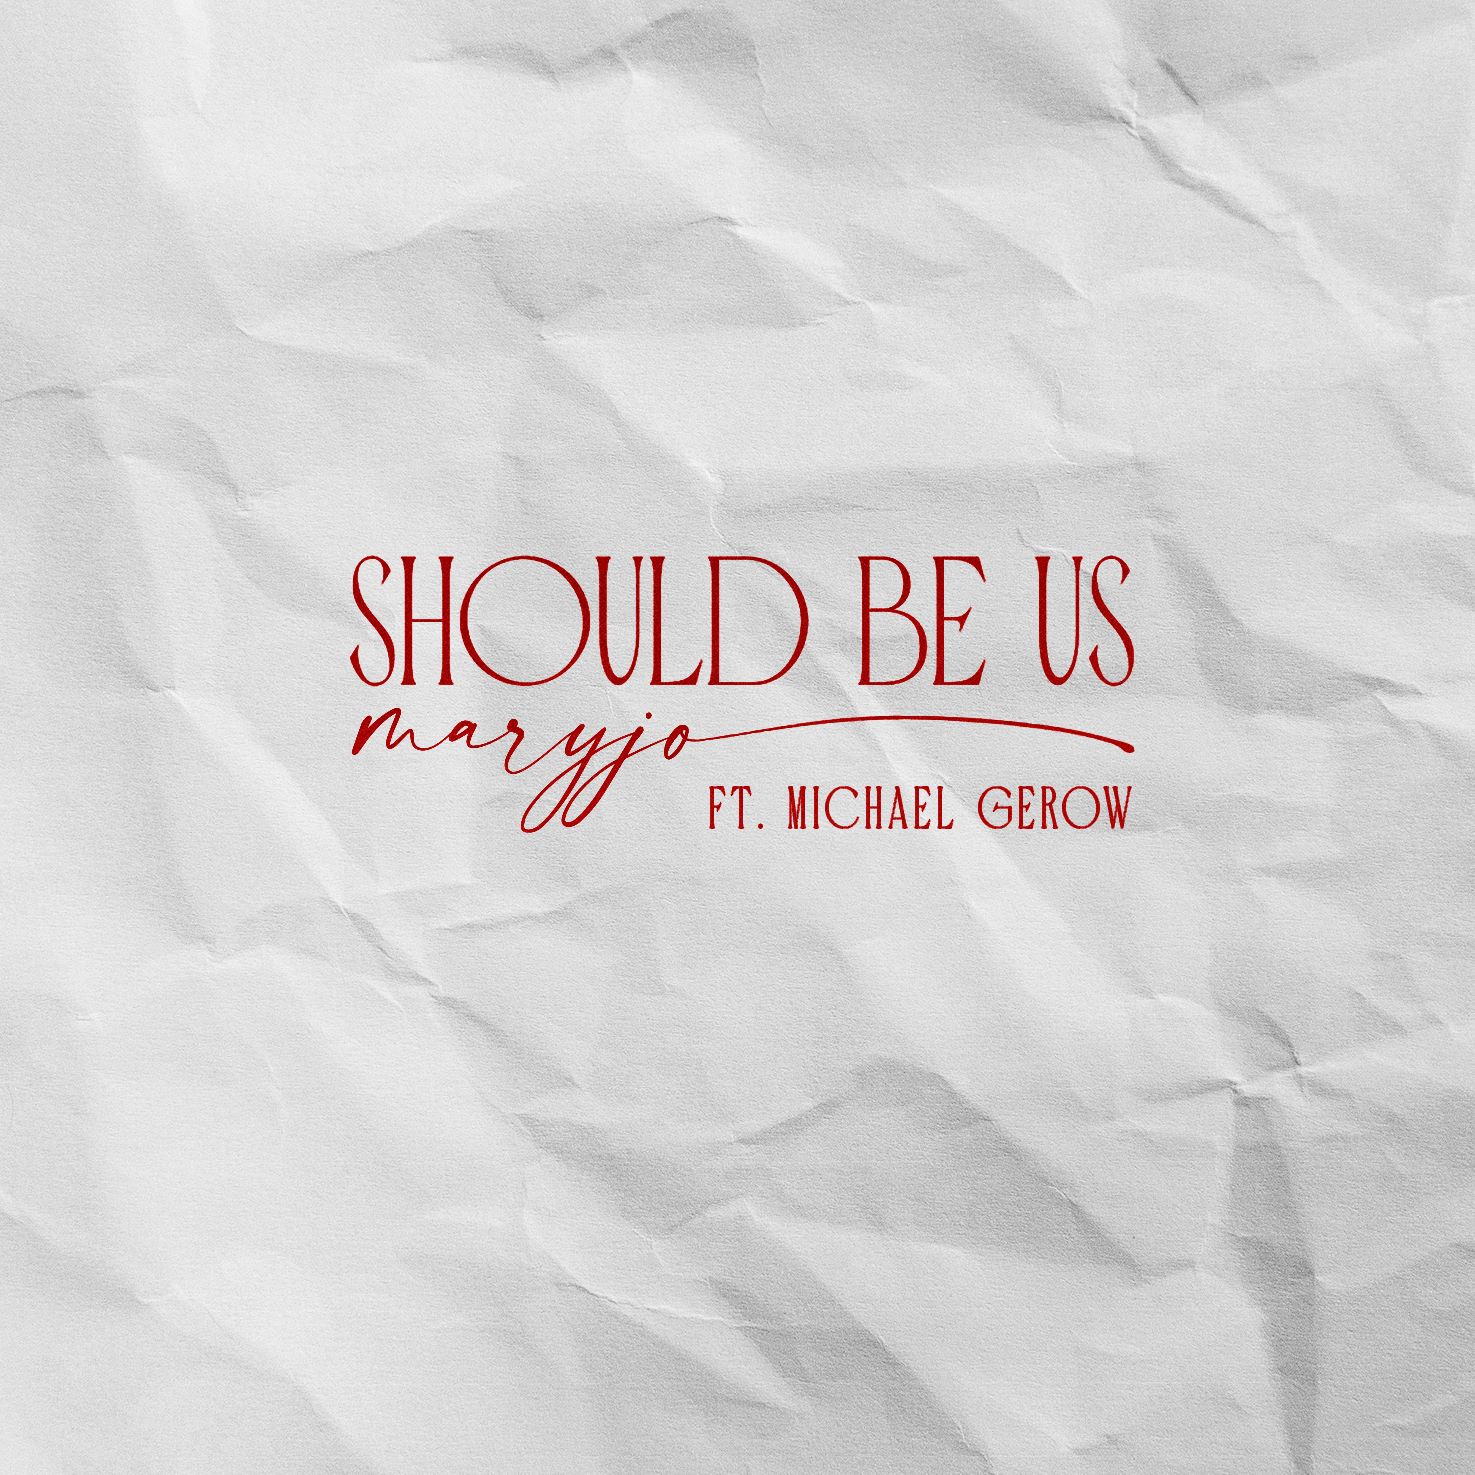 Should be us ft.Michael Gerow